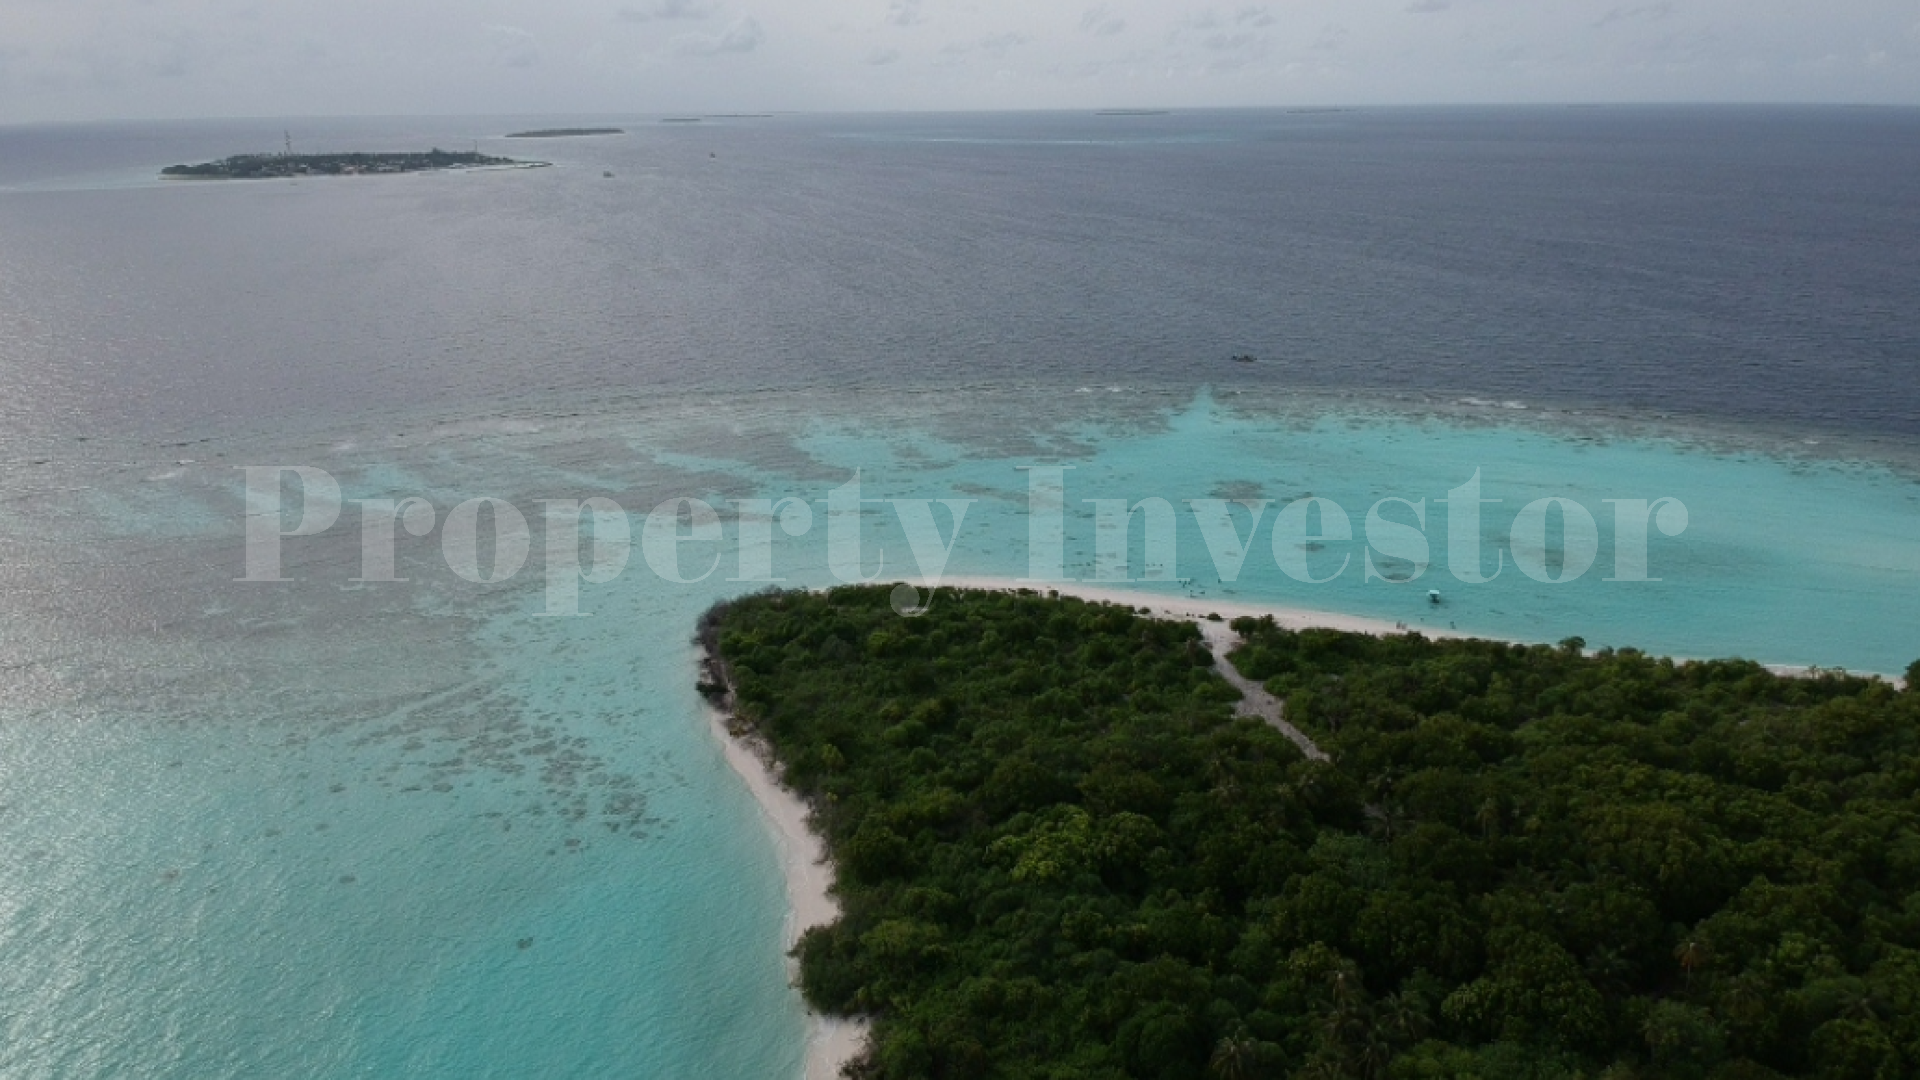 Picturesque 13 Hectare Private Virgin Island for Commercial Development in the Maldives